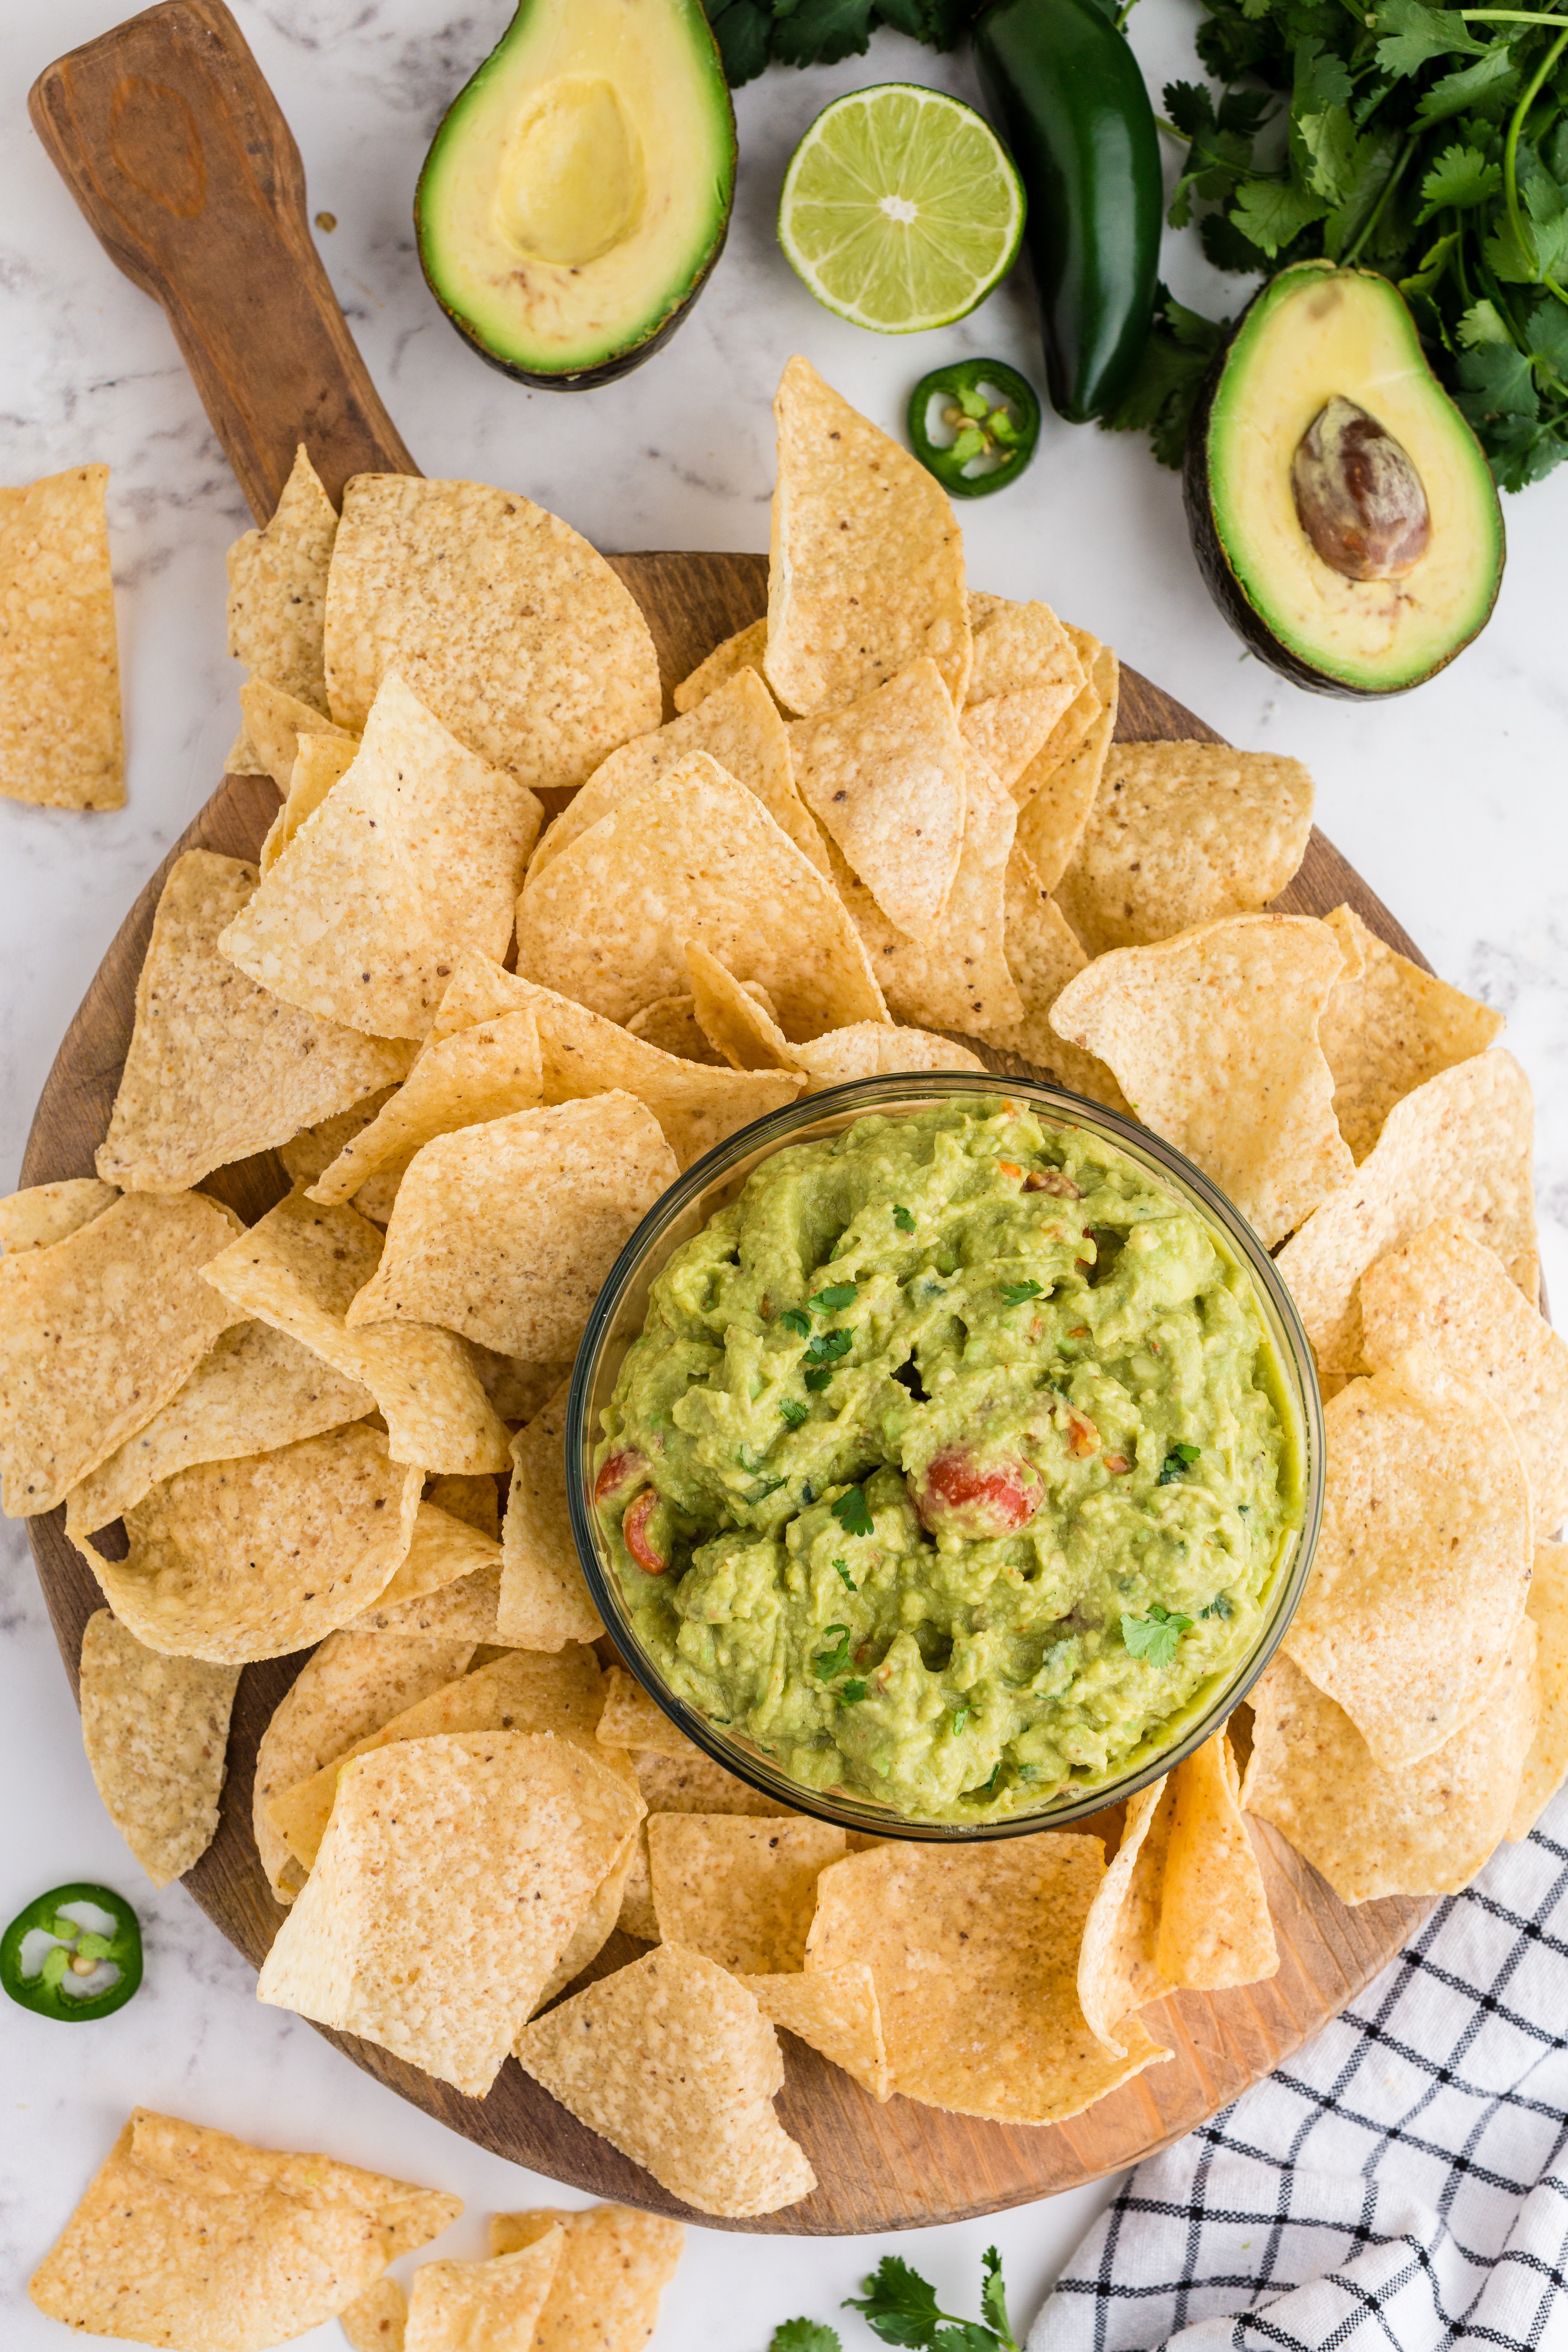 guacamole in clear glass bowl and chips, avocados, and cilantro around